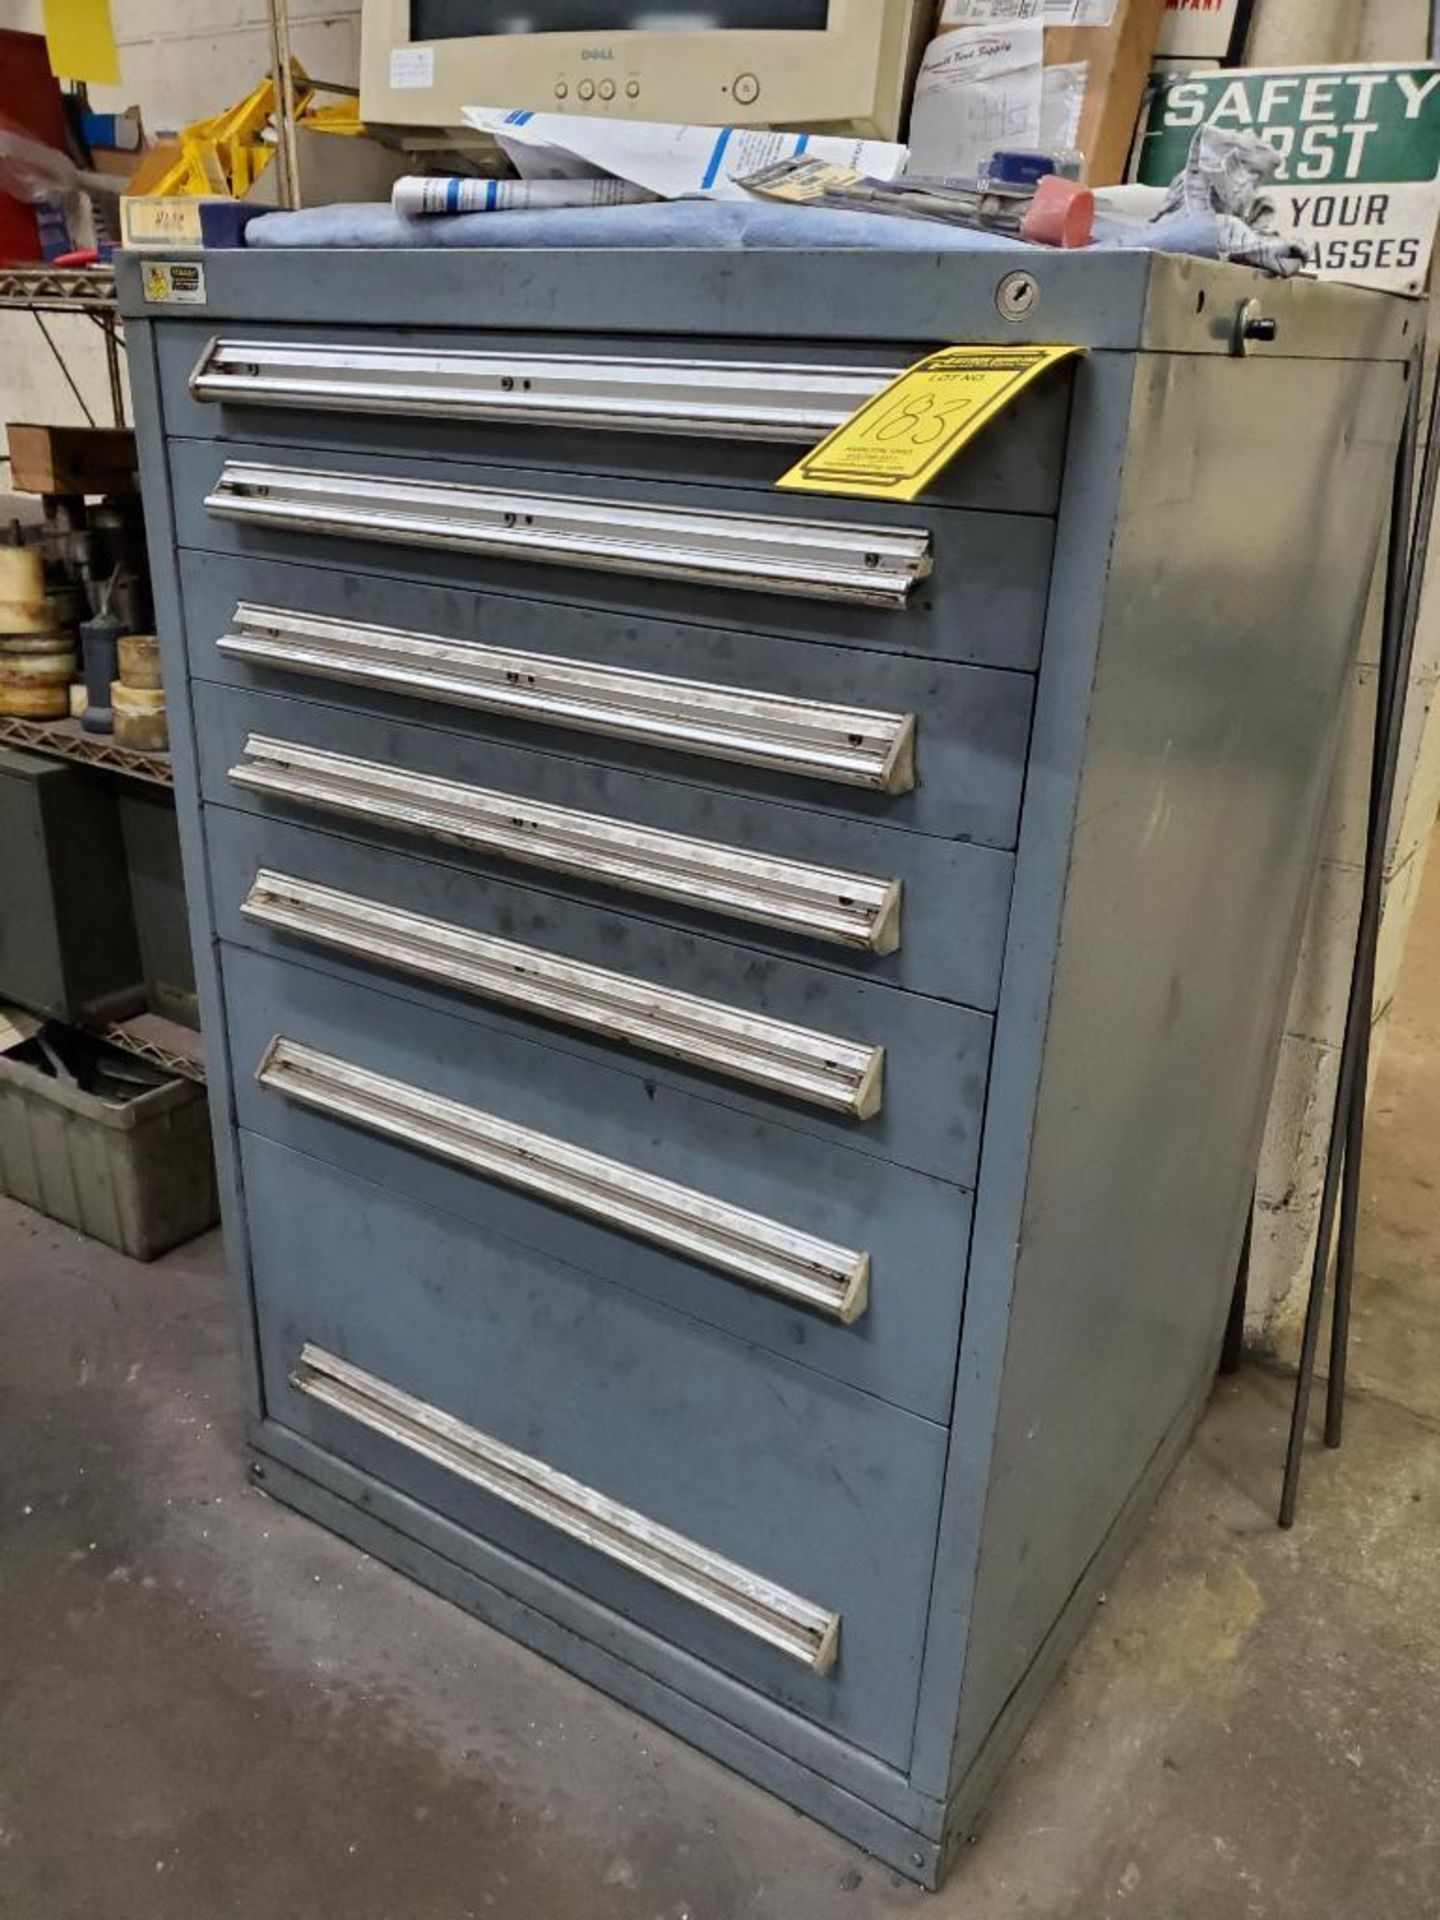 7-Drawer Stanley Vidmar Modular Tool Cabinet Full of Perishable Tooling - Image 2 of 13